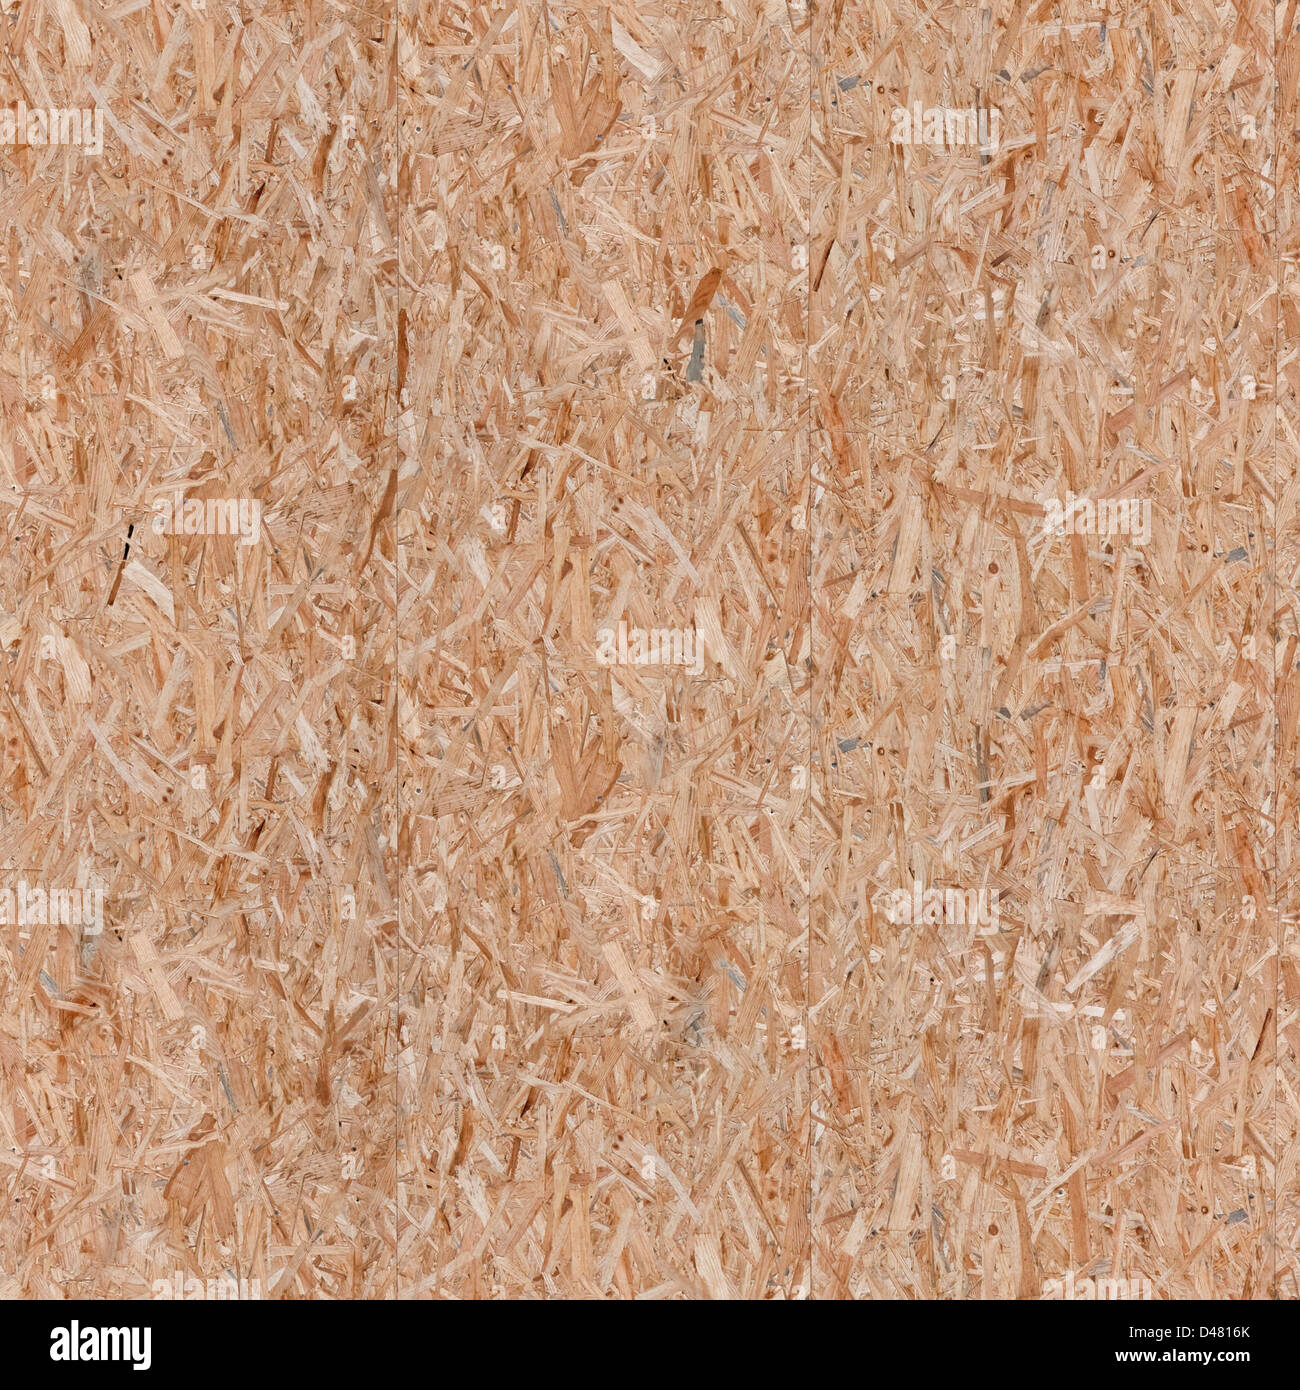 stock seamless background wood texture photo of chipboard. scale: sample is about 2 feet high and across. Stock Photo